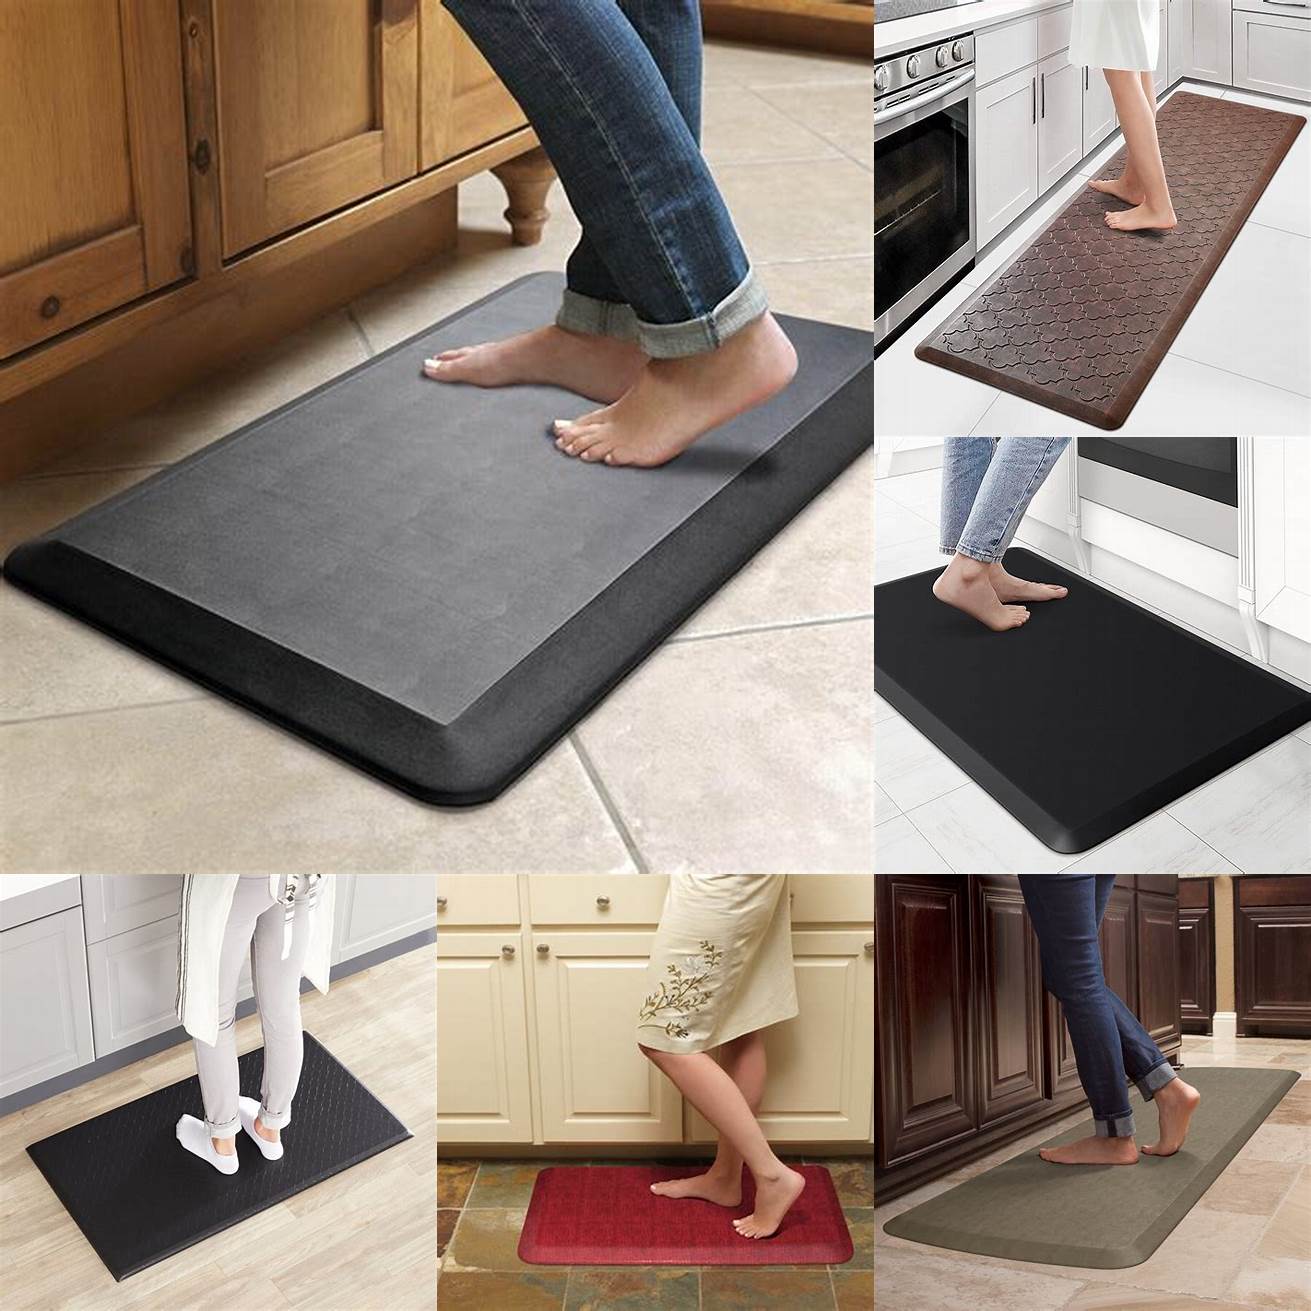 Reduces fatigue - Standing for long periods can cause fatigue and discomfort A cushioned kitchen floor mat can reduce the strain on your feet and legs